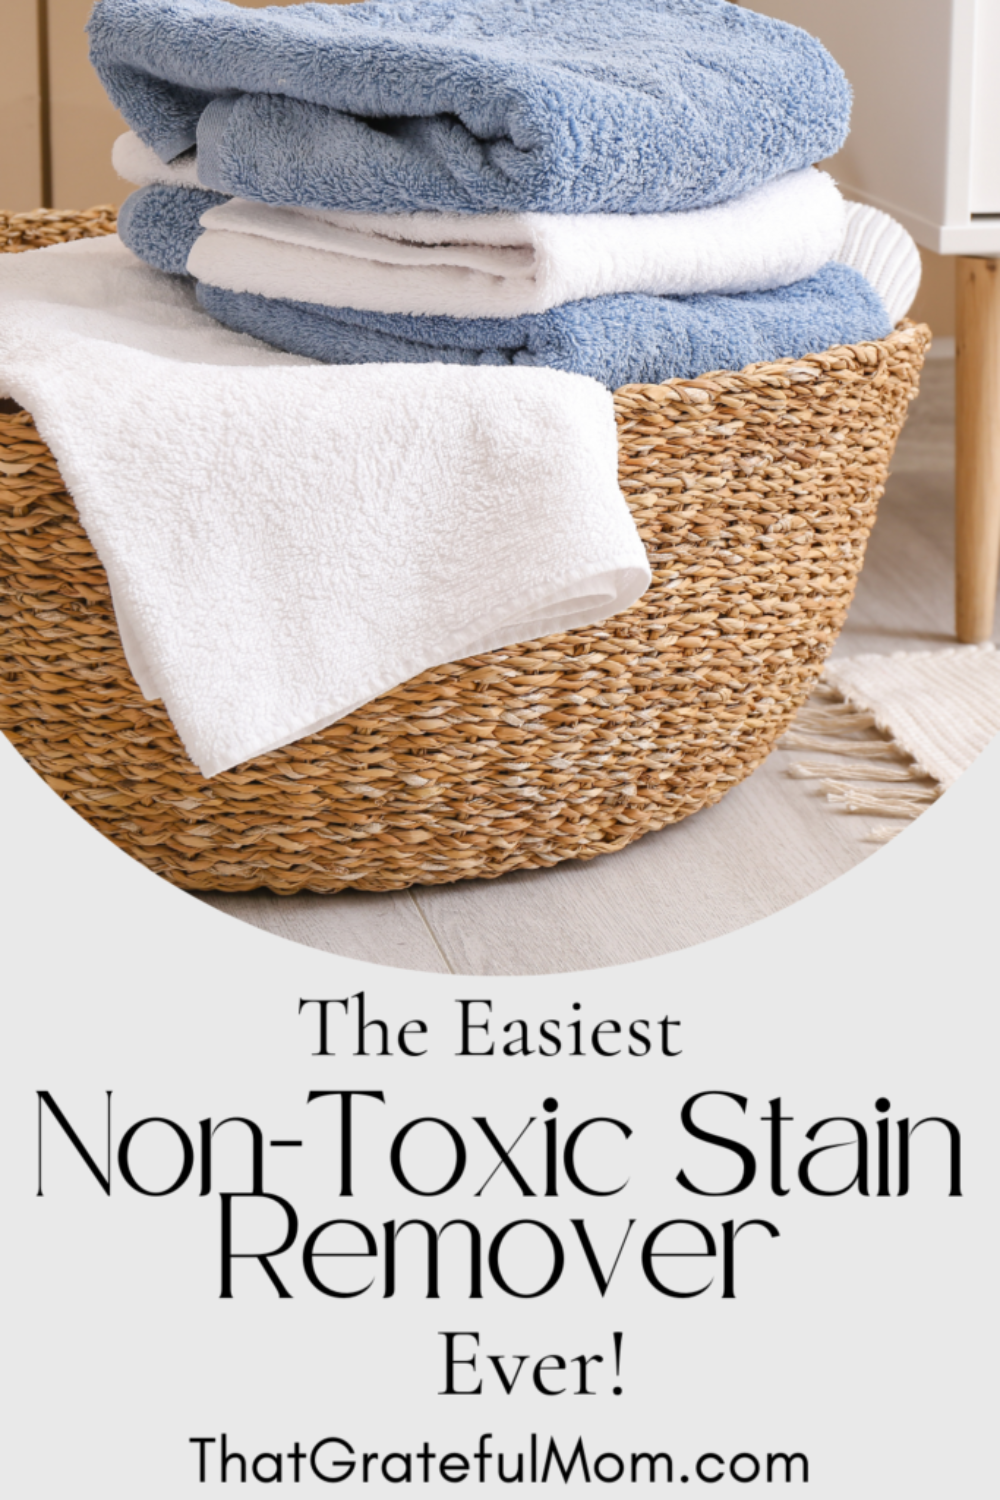 a basket on stained towels being treated with non-toxic stain remover